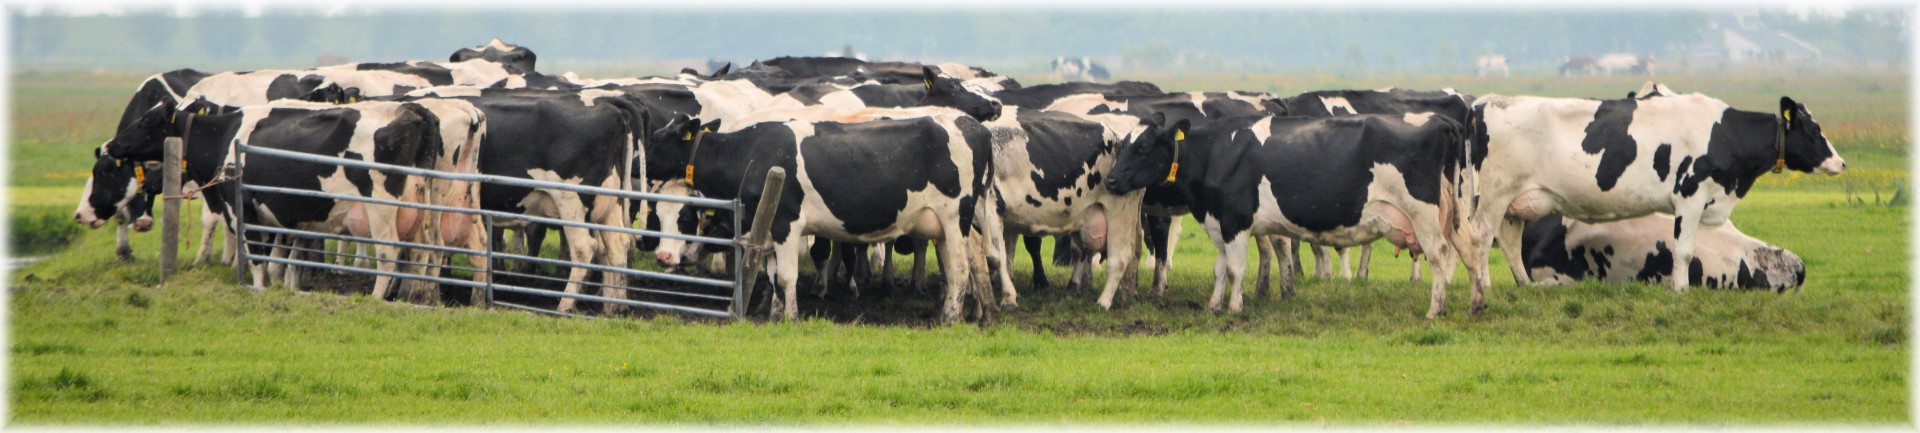 A group of cows shelter together